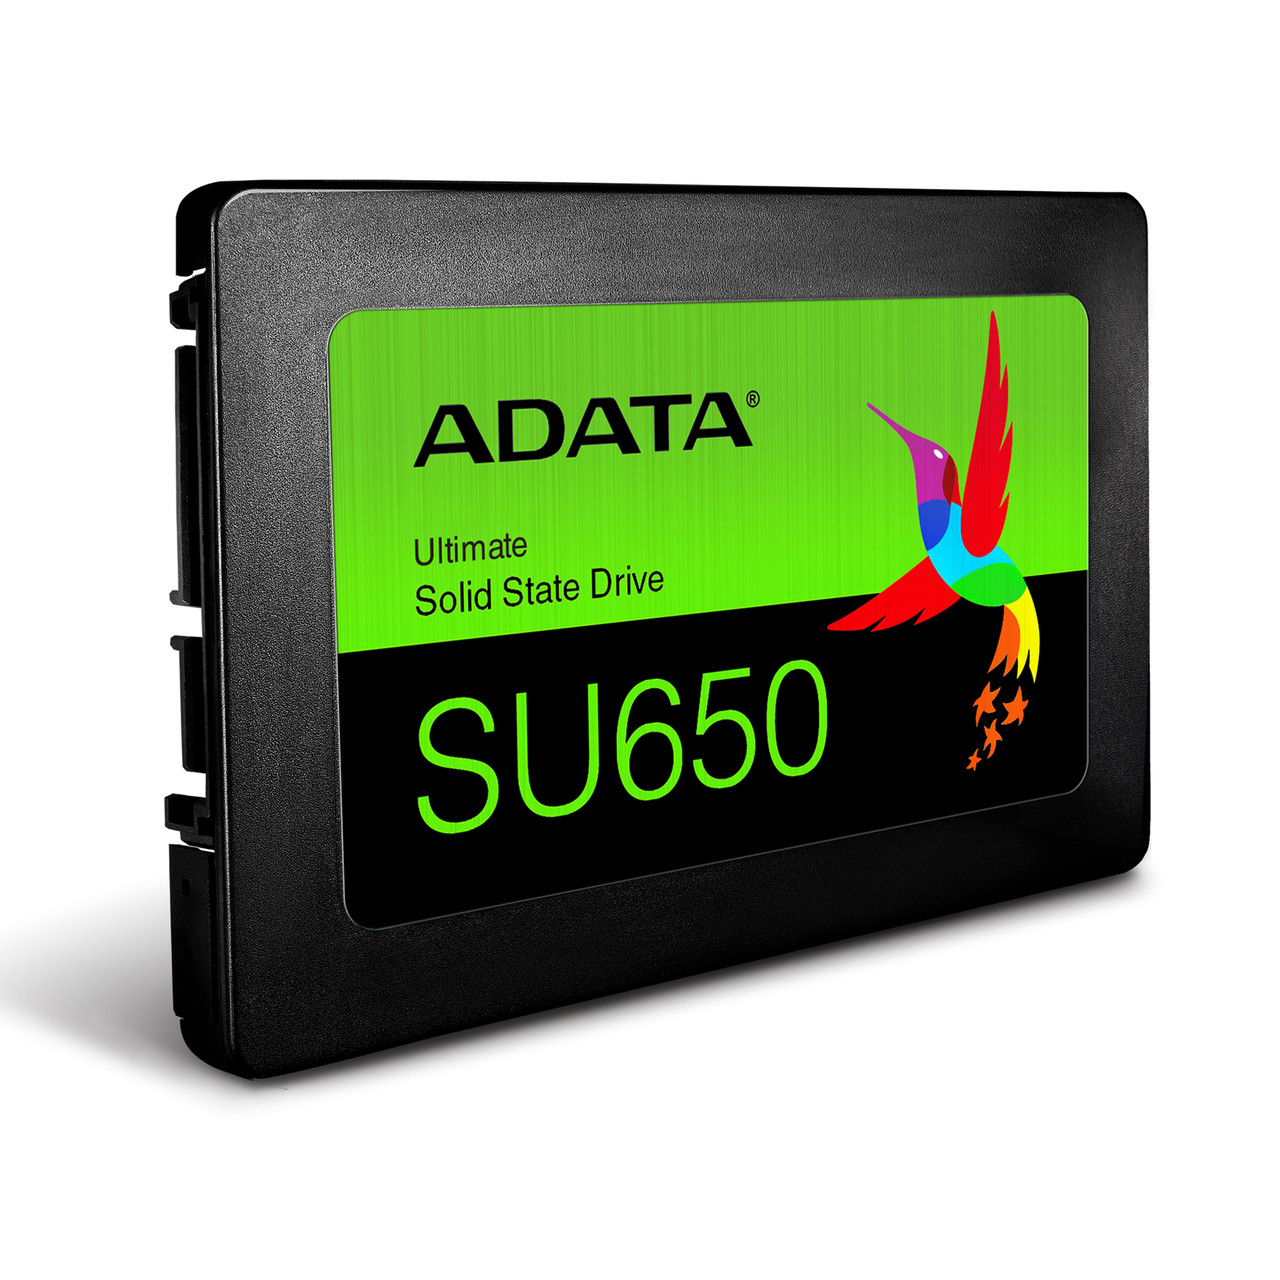 ADATA Ultimate Series: SU650 120GB SATA III - 2.5" Internal Solid State  Drive | 3D NAND - Black/Green SSD | Up to 520MBps - 1PK - ADATA